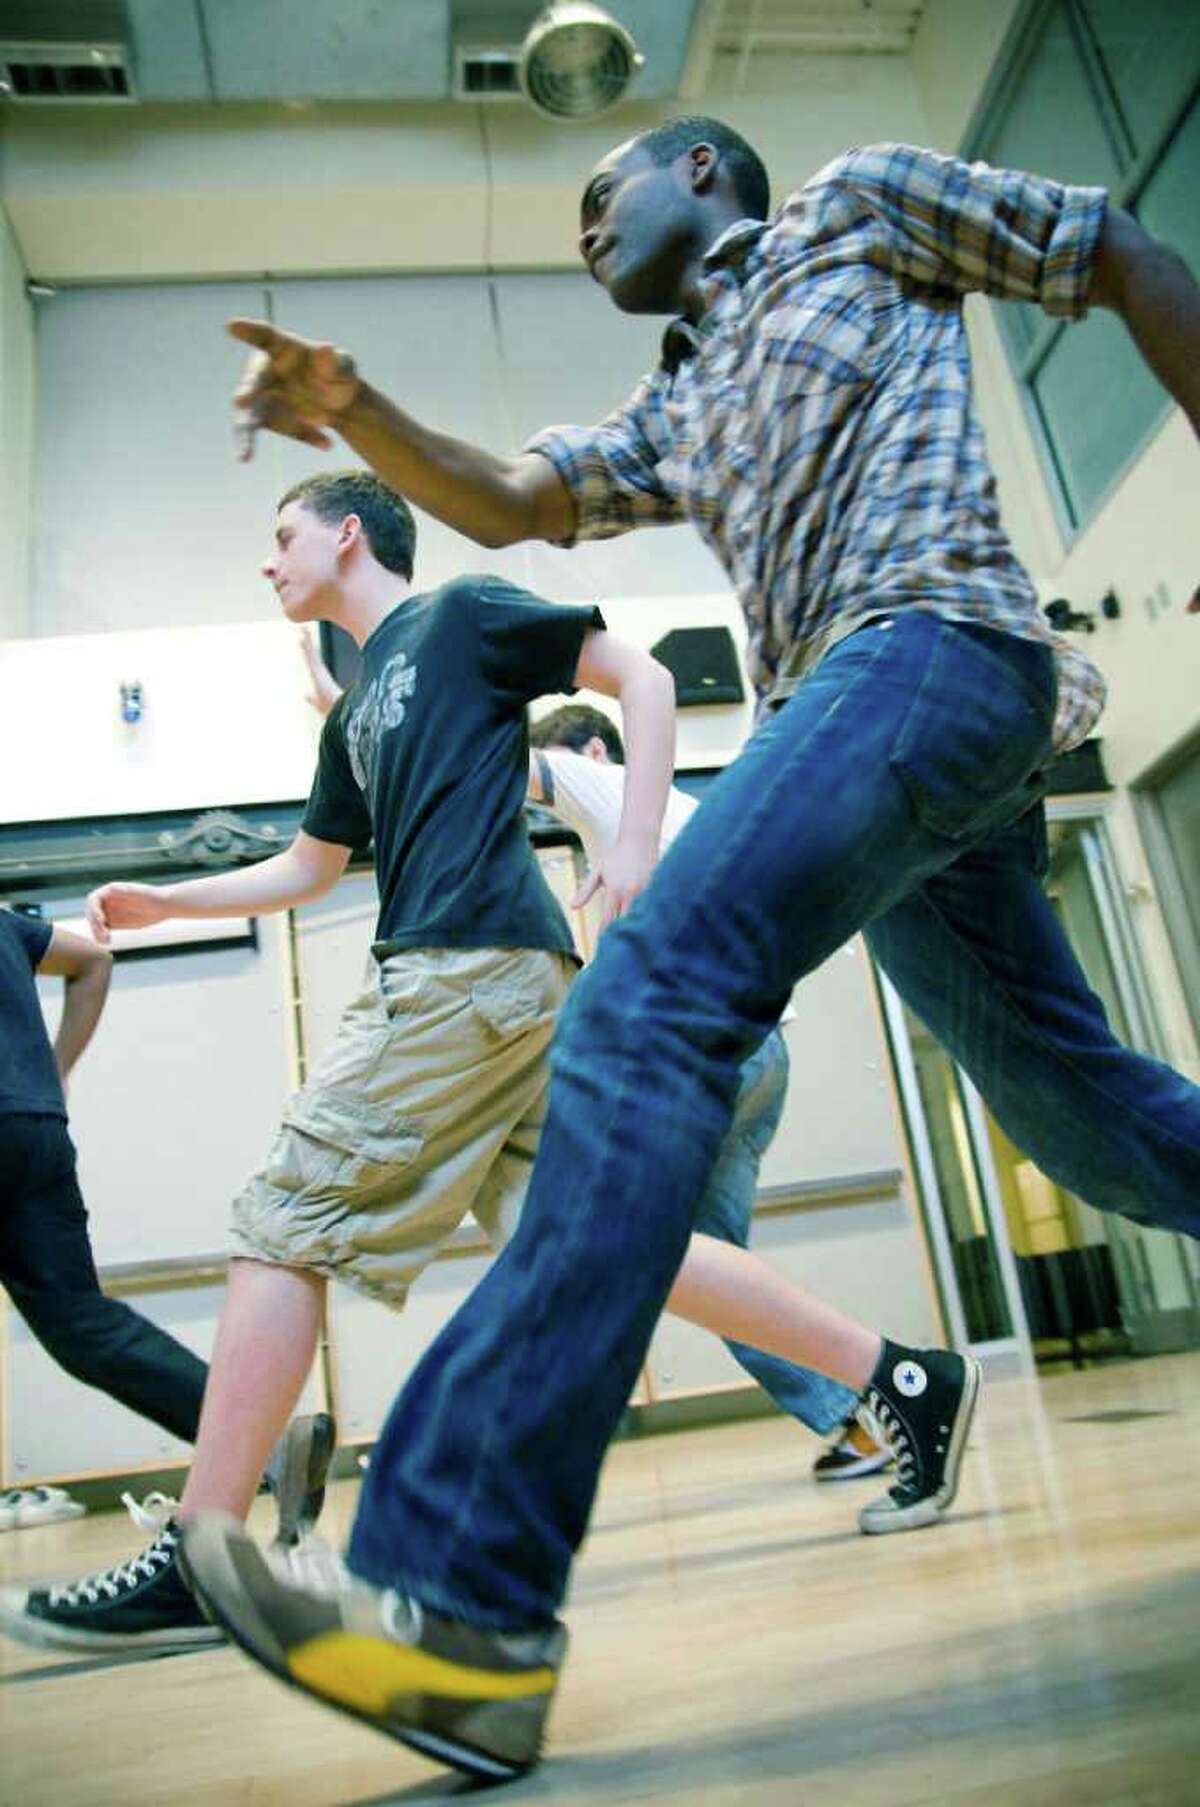 James O'Reilly, Jacob Presson and William Jackson Harper rehearse a dance scene from Shakespeare on the Sound's upcoming production of "Much Ado About Nothing." The show begins Thursday, June 16, at Pinkney Park in the Rowayton section of Norwalk. Contributed photo/Chandler Simms